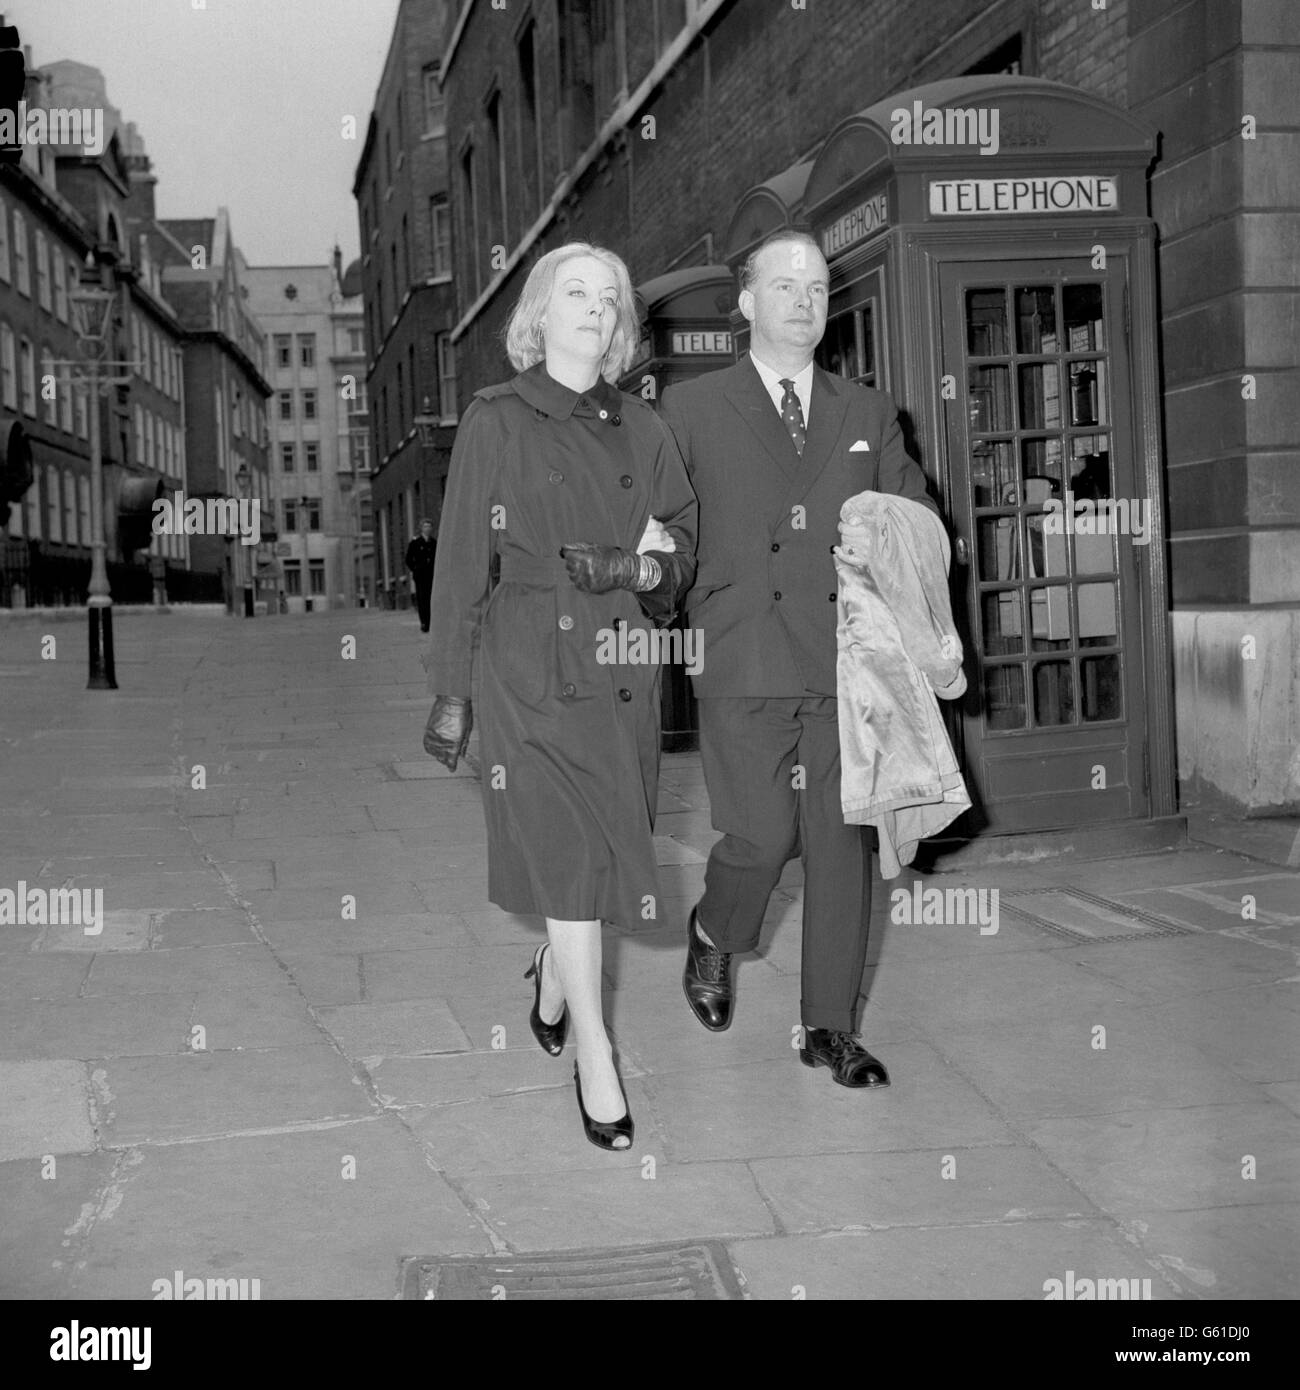 Colin Jordan, 42, leader of the British National Socialist Party, who was later due to appear at Bow Street Magistrates' Court charged under the Public Order Act with using insulting behaviour, pictured walking with his wife, Francoise Dior, in London. Stock Photo